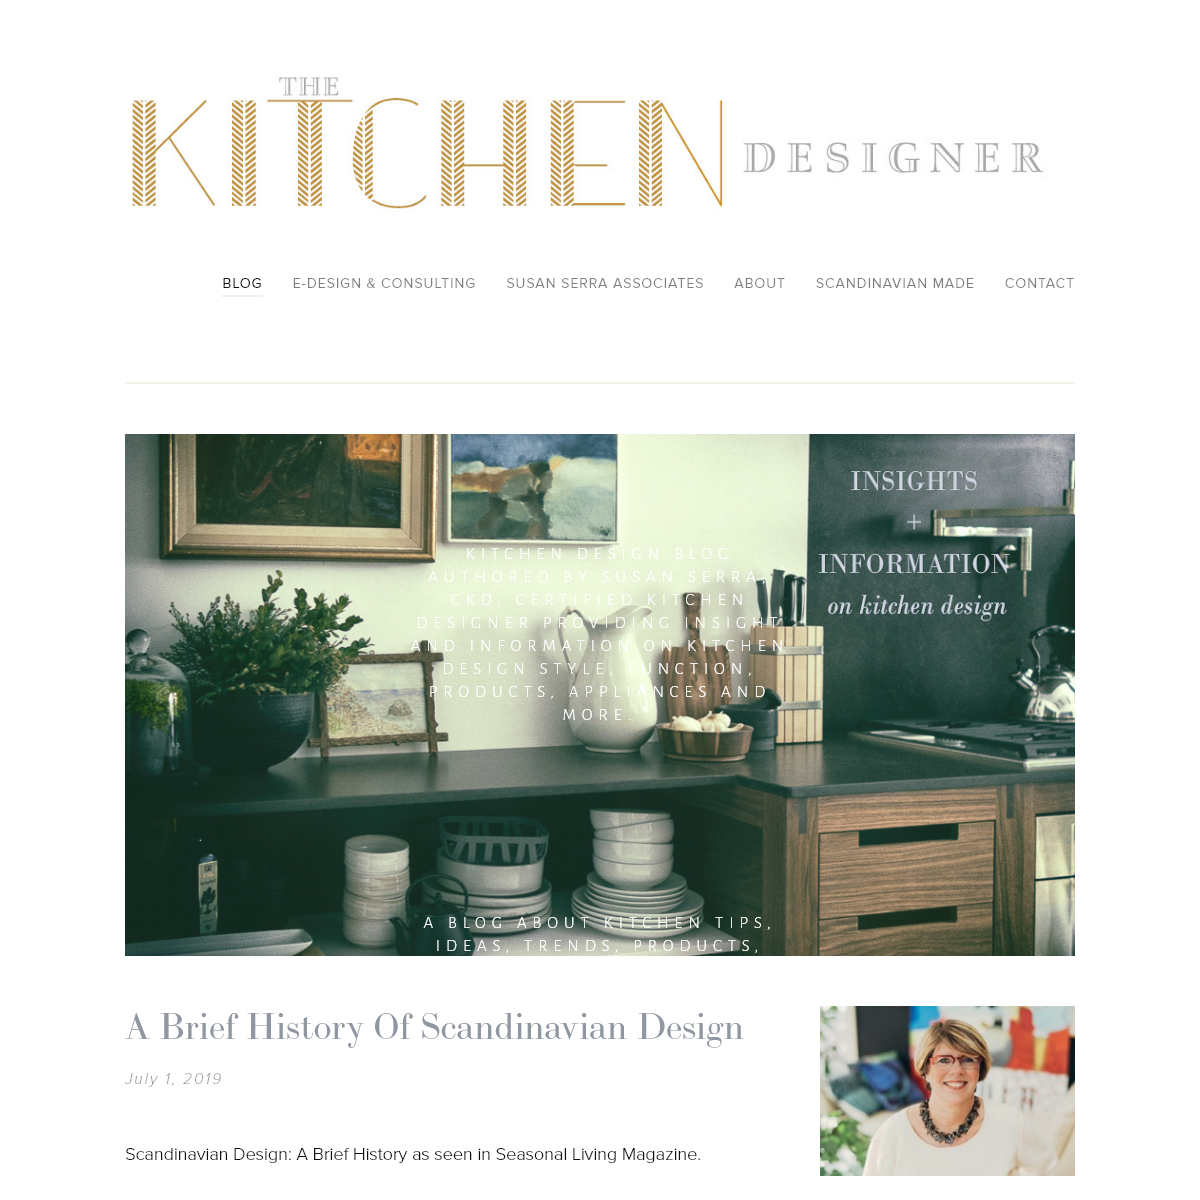 A complete backup of thekitchendesigner.org